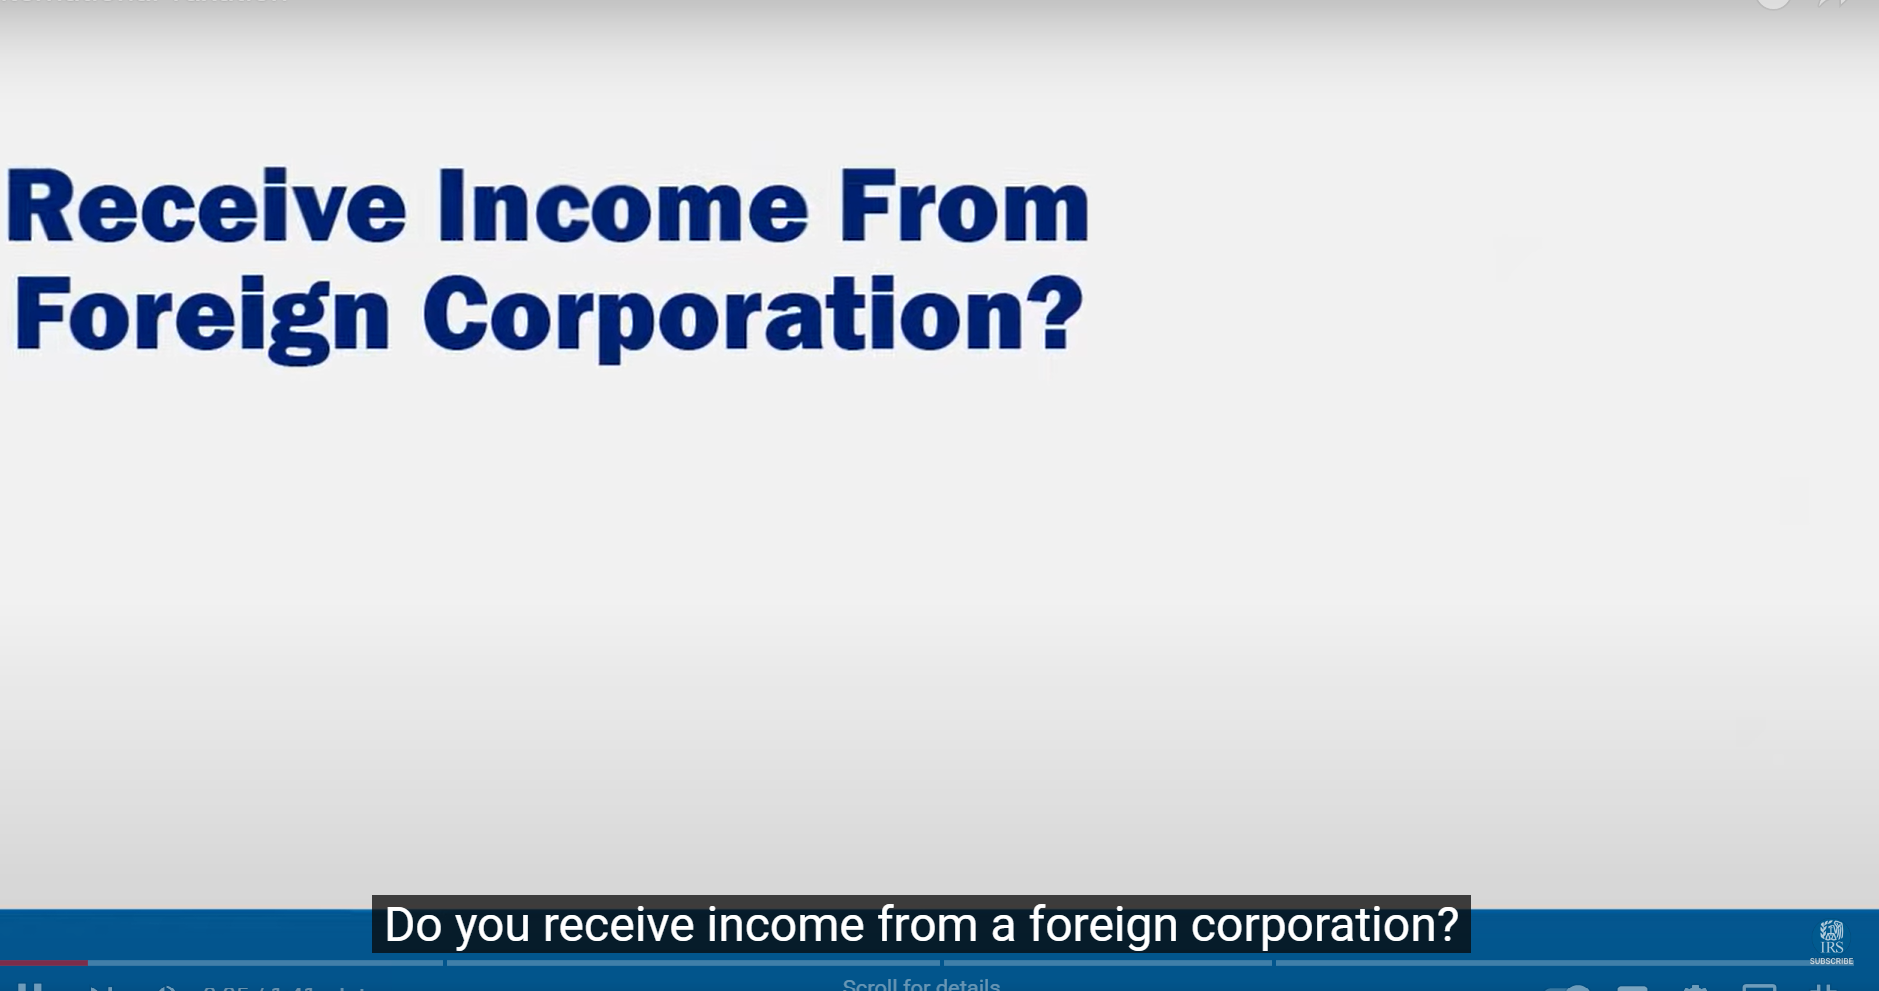 TCJA changes affect when foreign corporate income is taxable to U.S. shareholders.